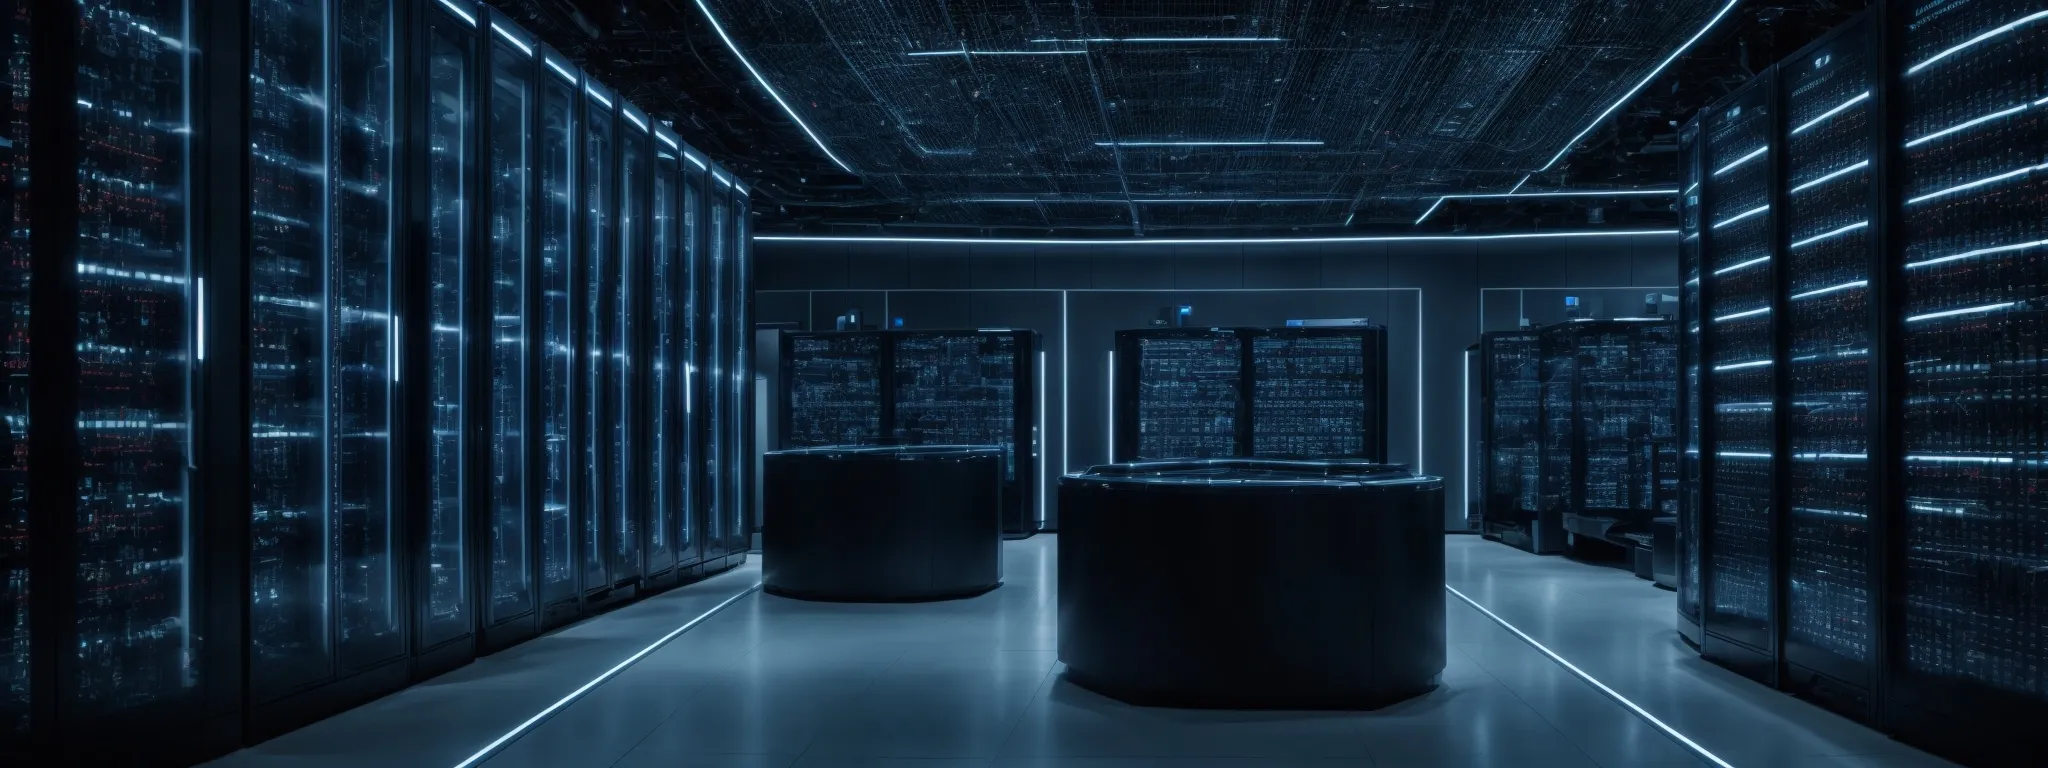 a futuristic data center filled with rows of high-tech servers representing cutting-edge website infrastructure.